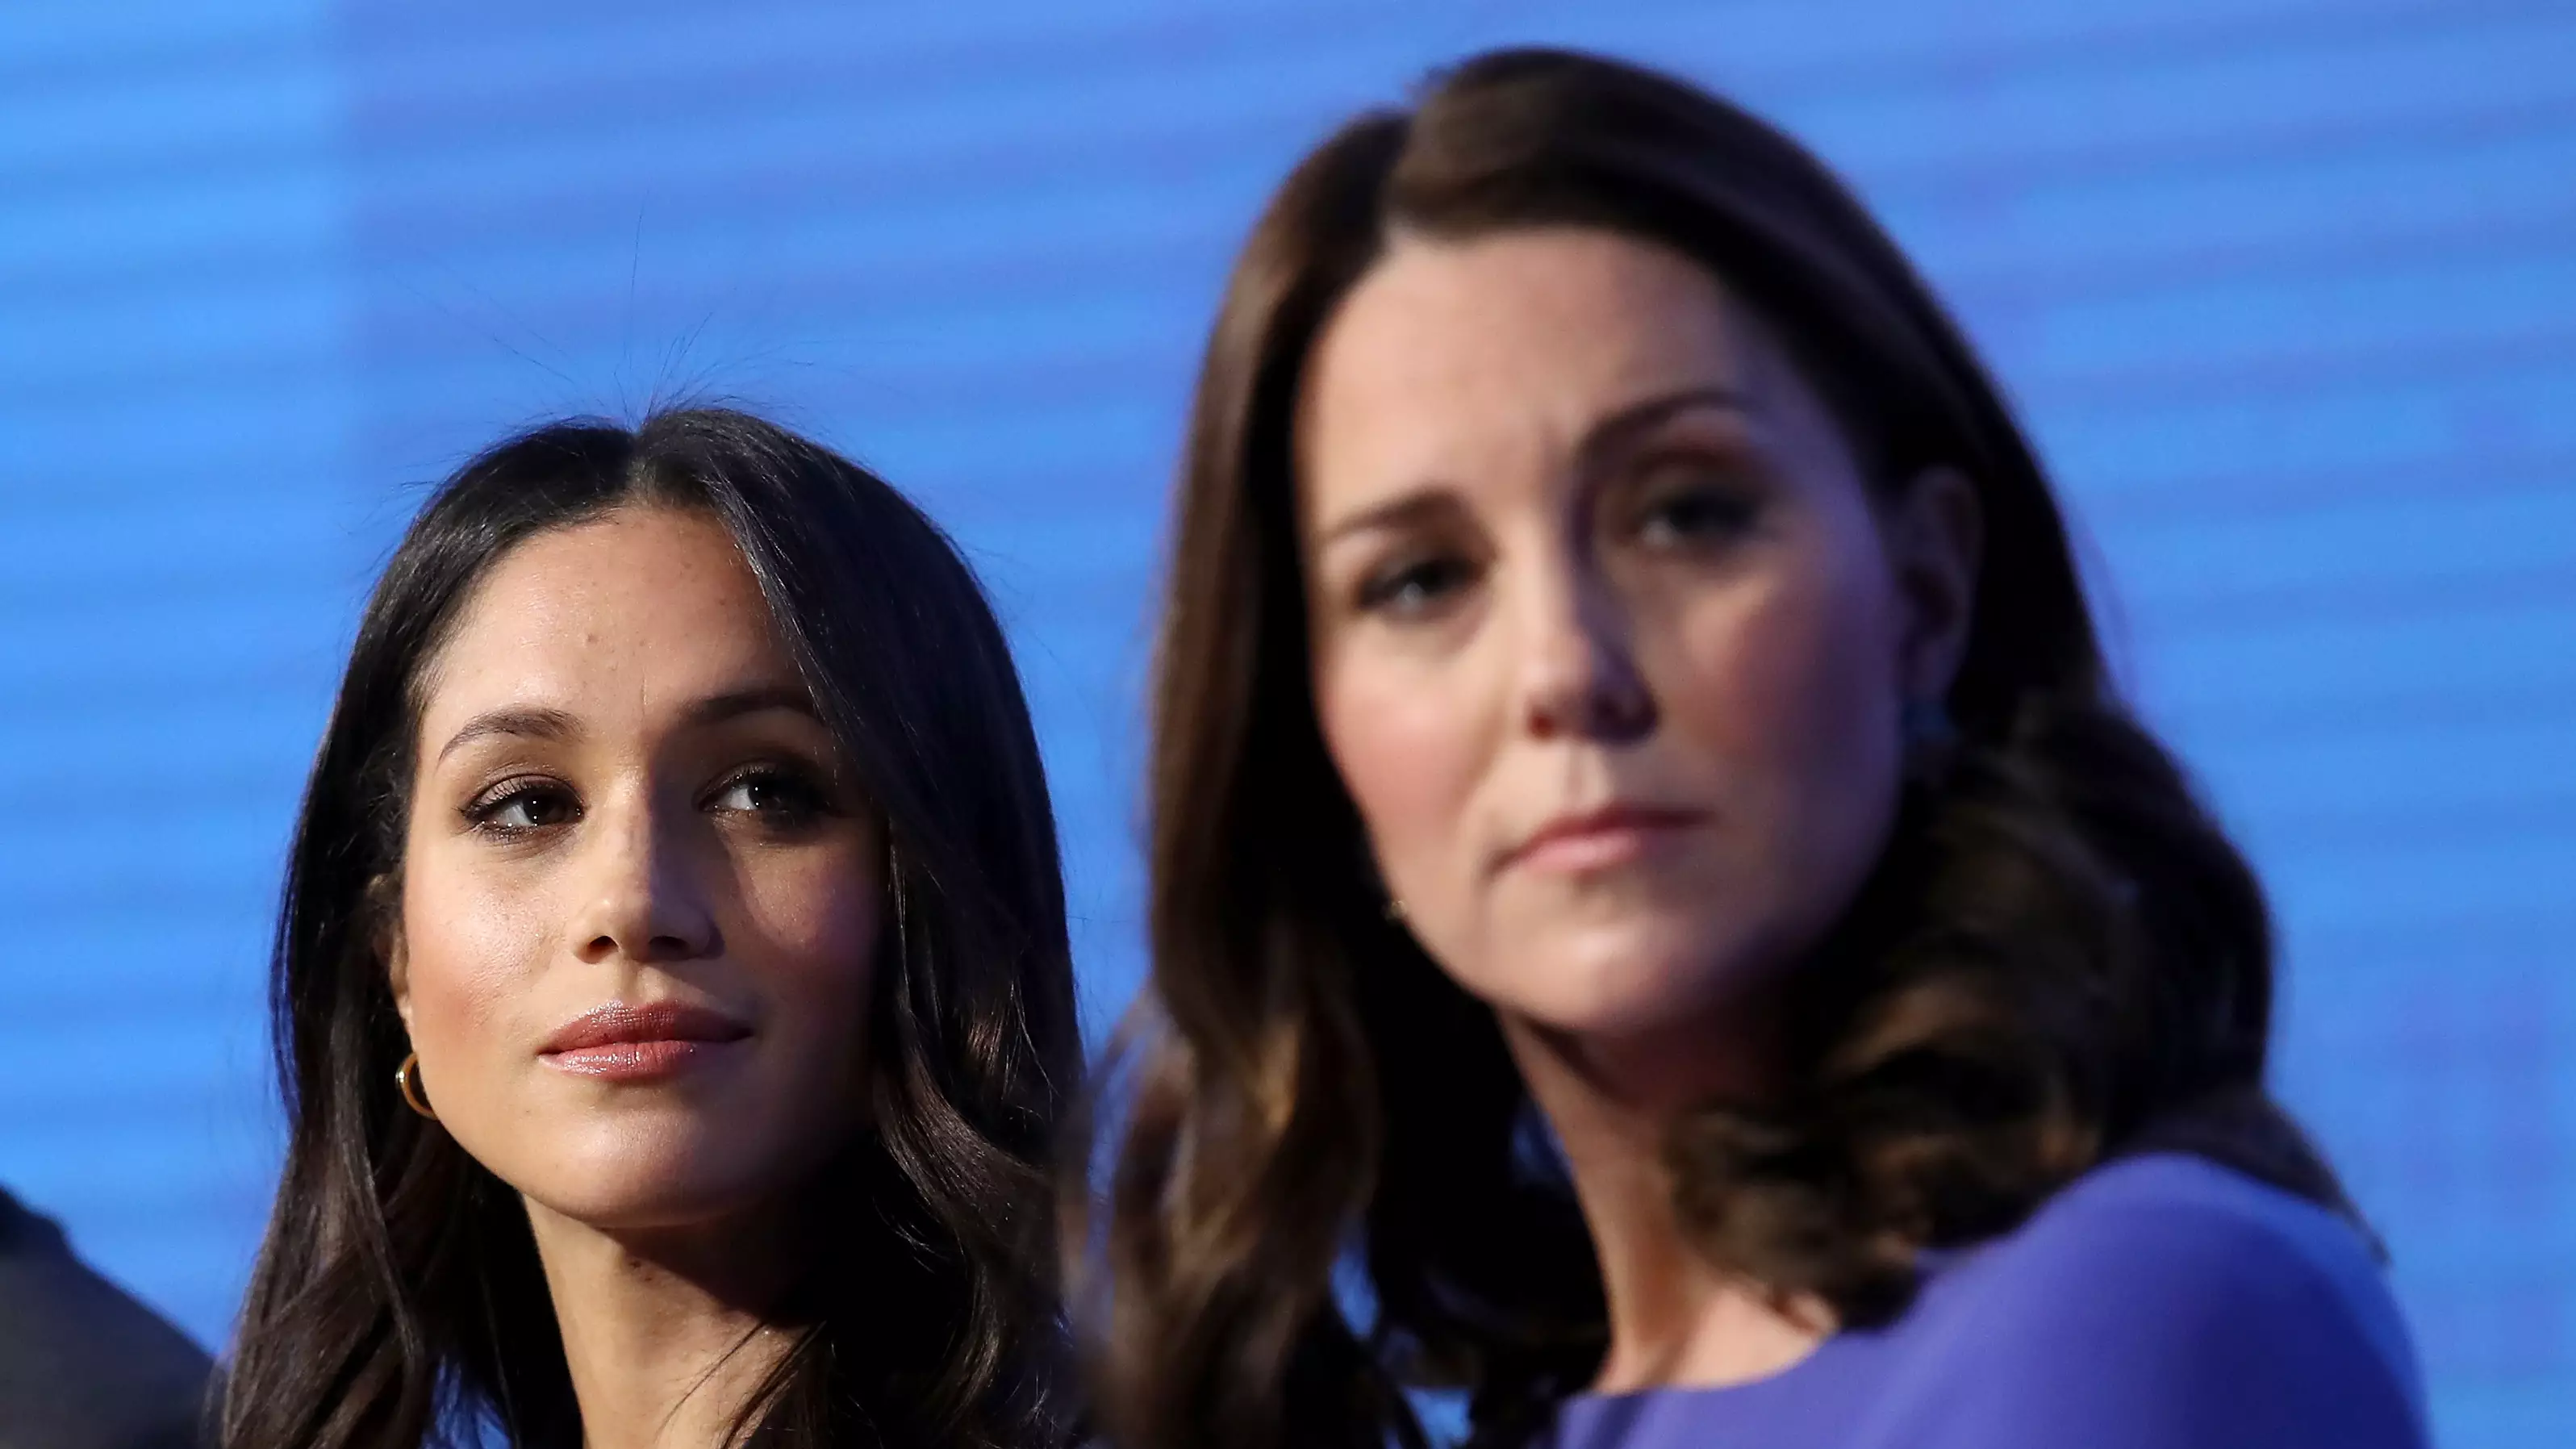 Meghan Markle 'Emailed Royal Staff Asking Them To Finally Set Record Straight' After Kate Middleton Row, Friend Claims